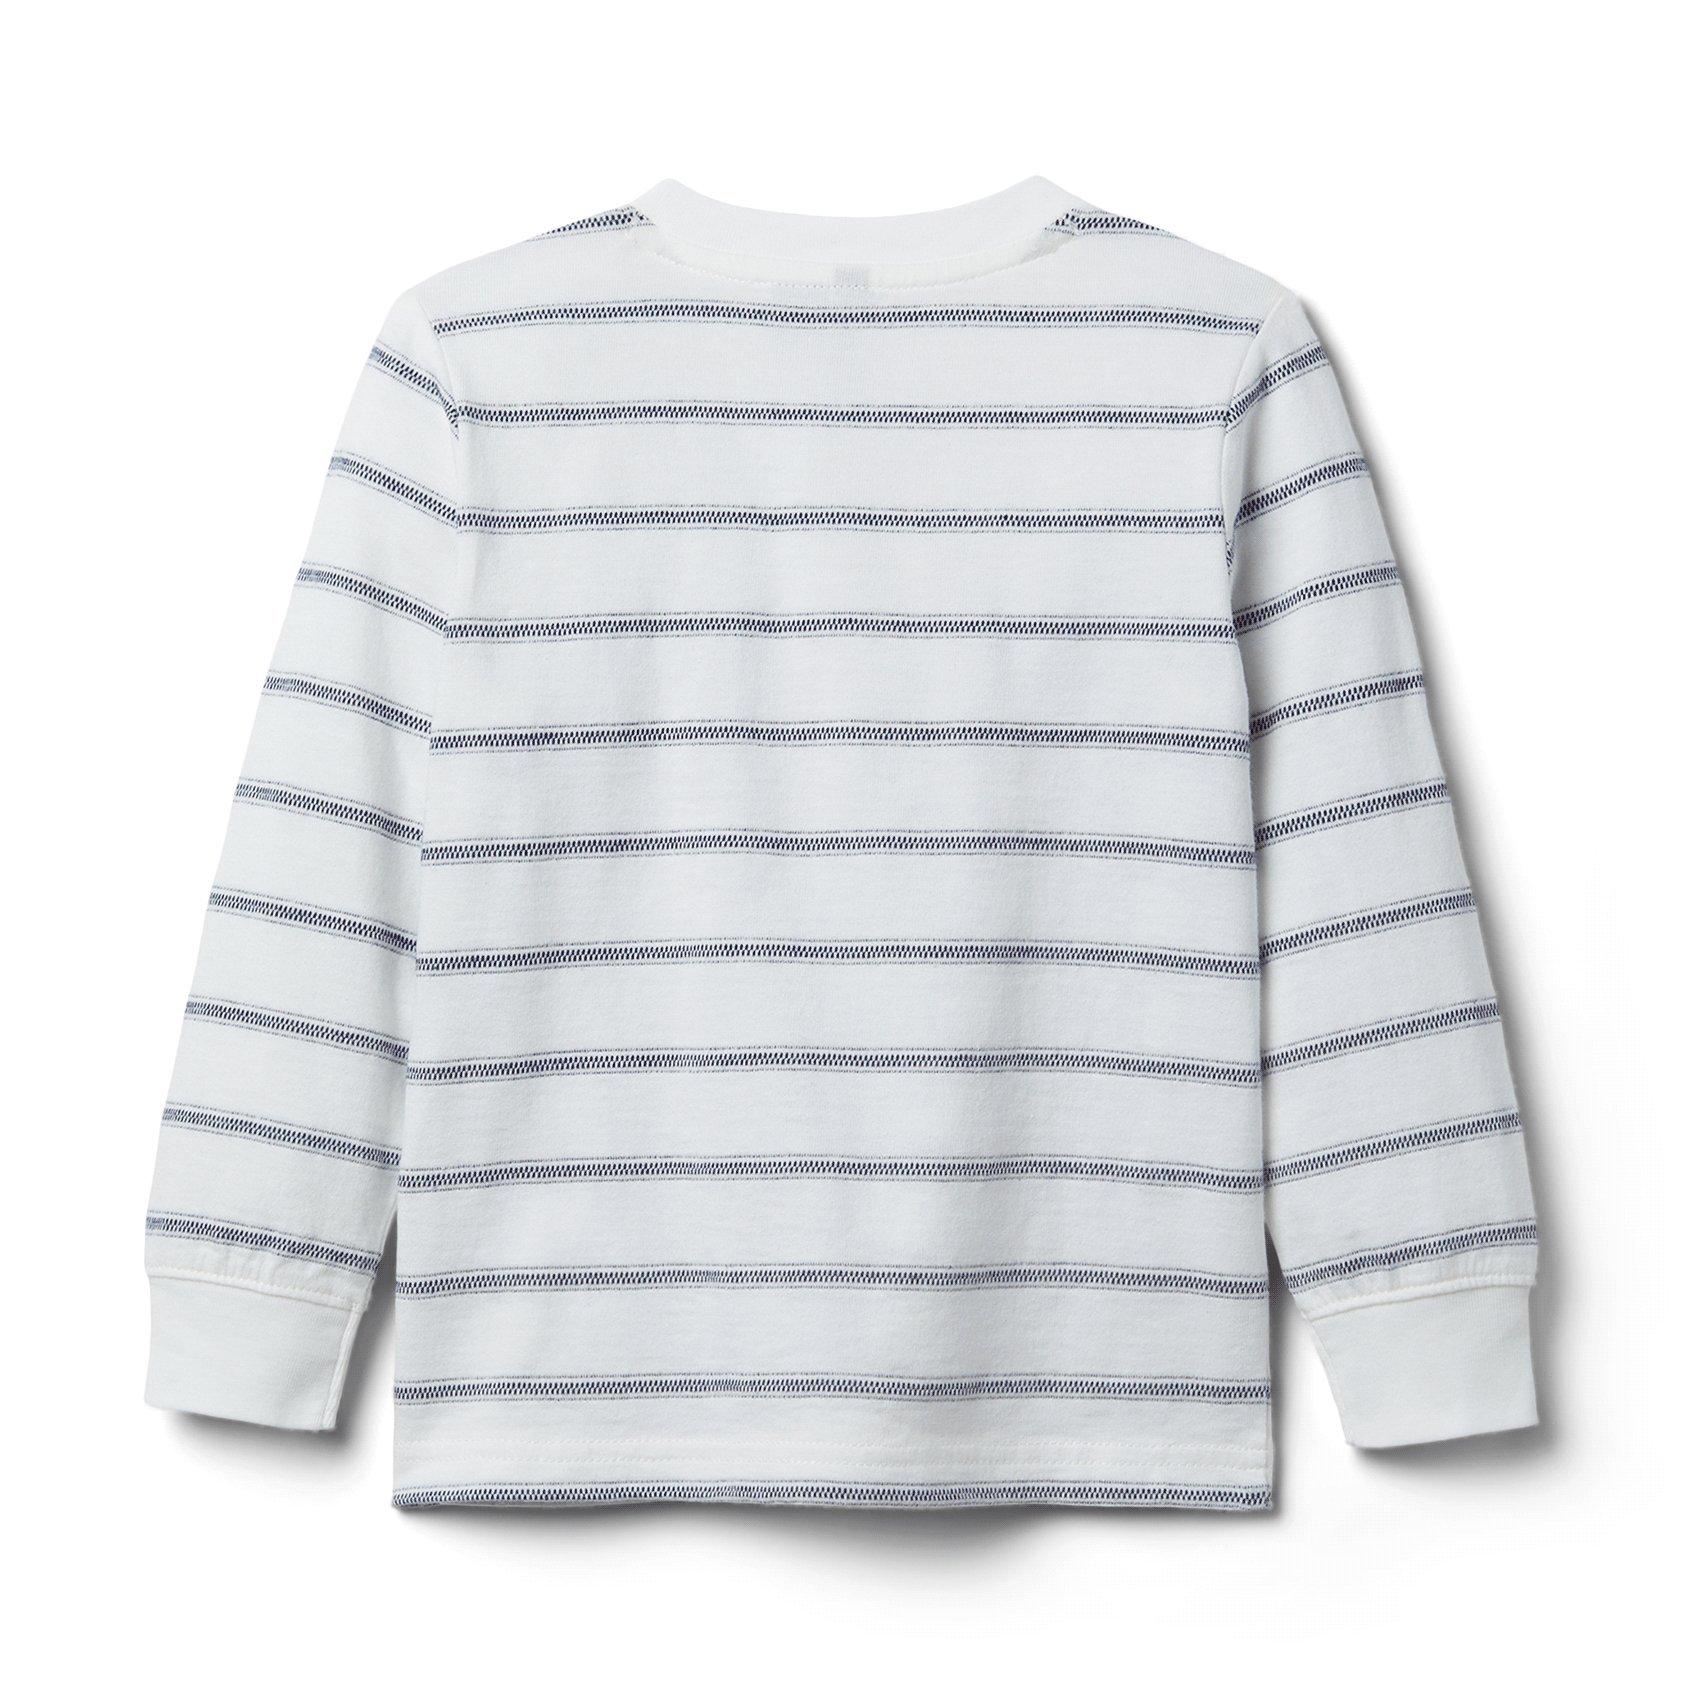 Striped Textured Henley Tee image number 3